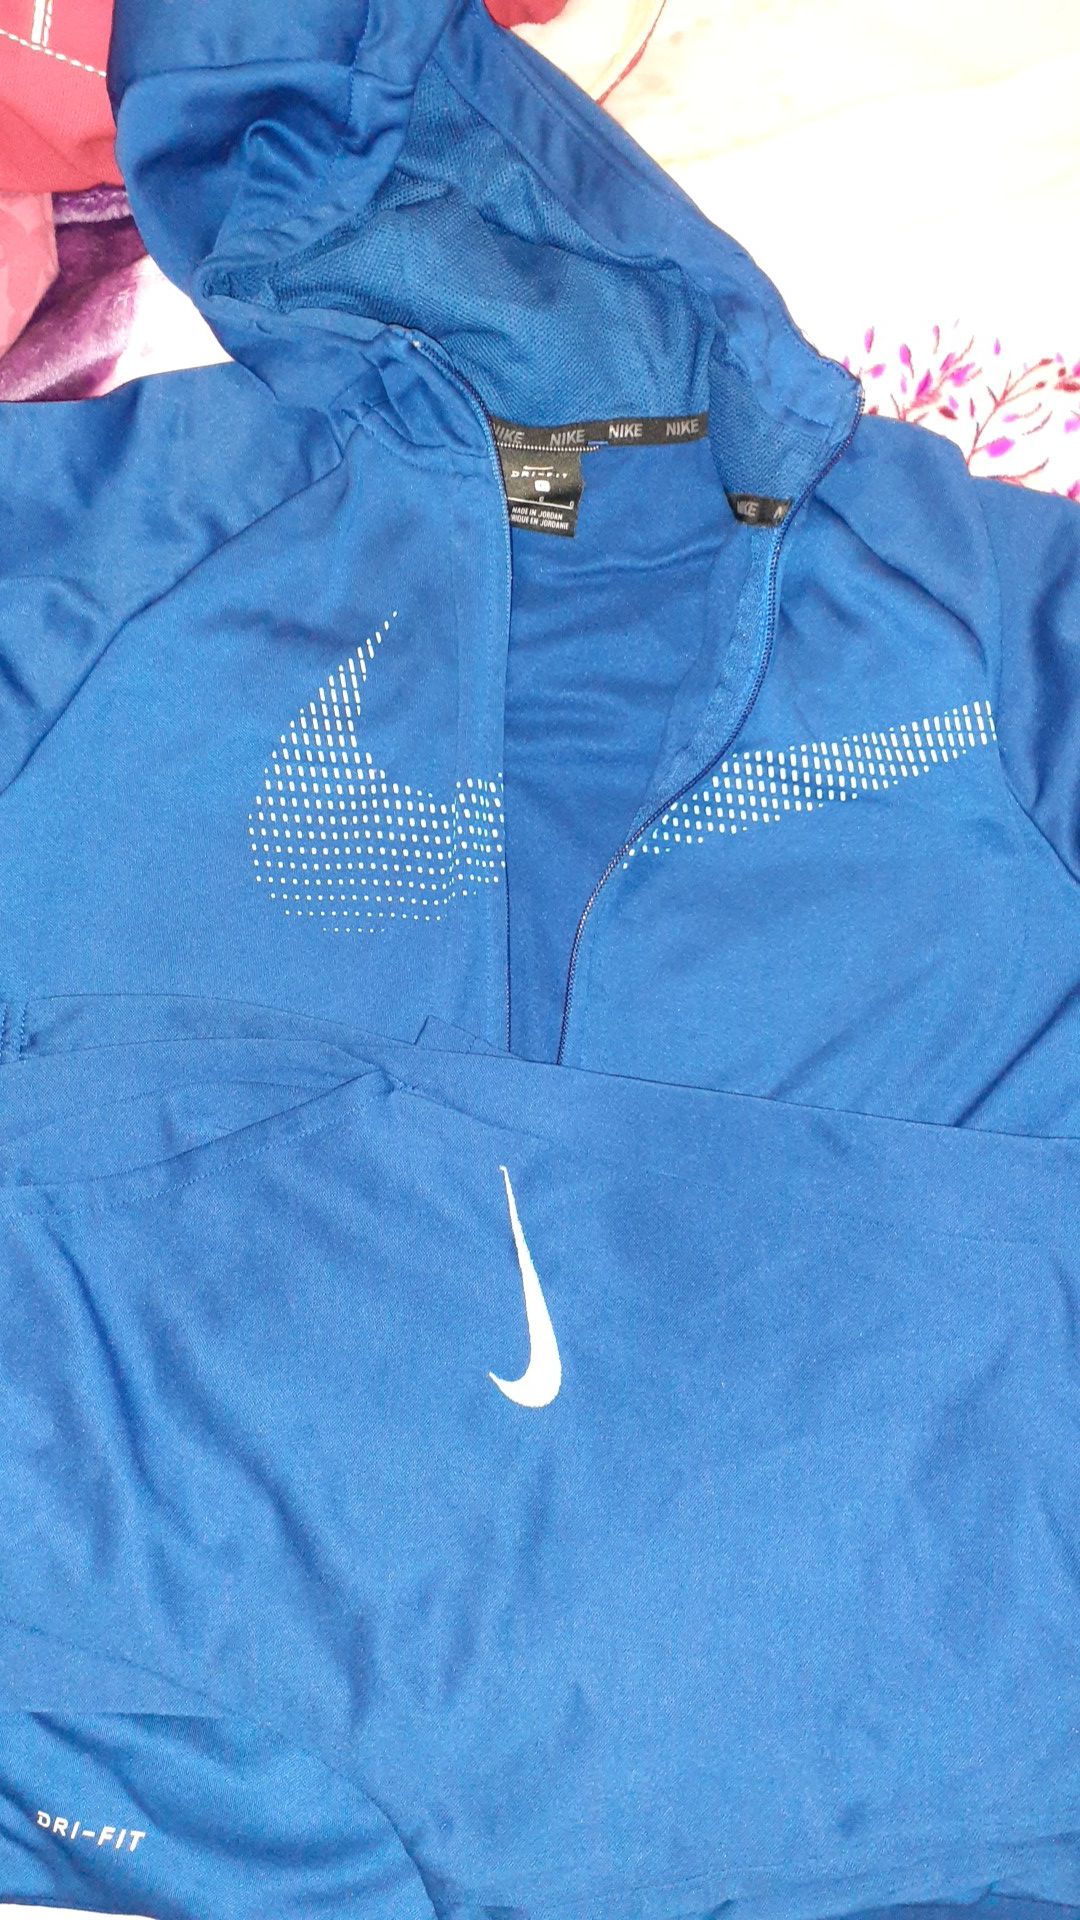 4 Nike jump suits